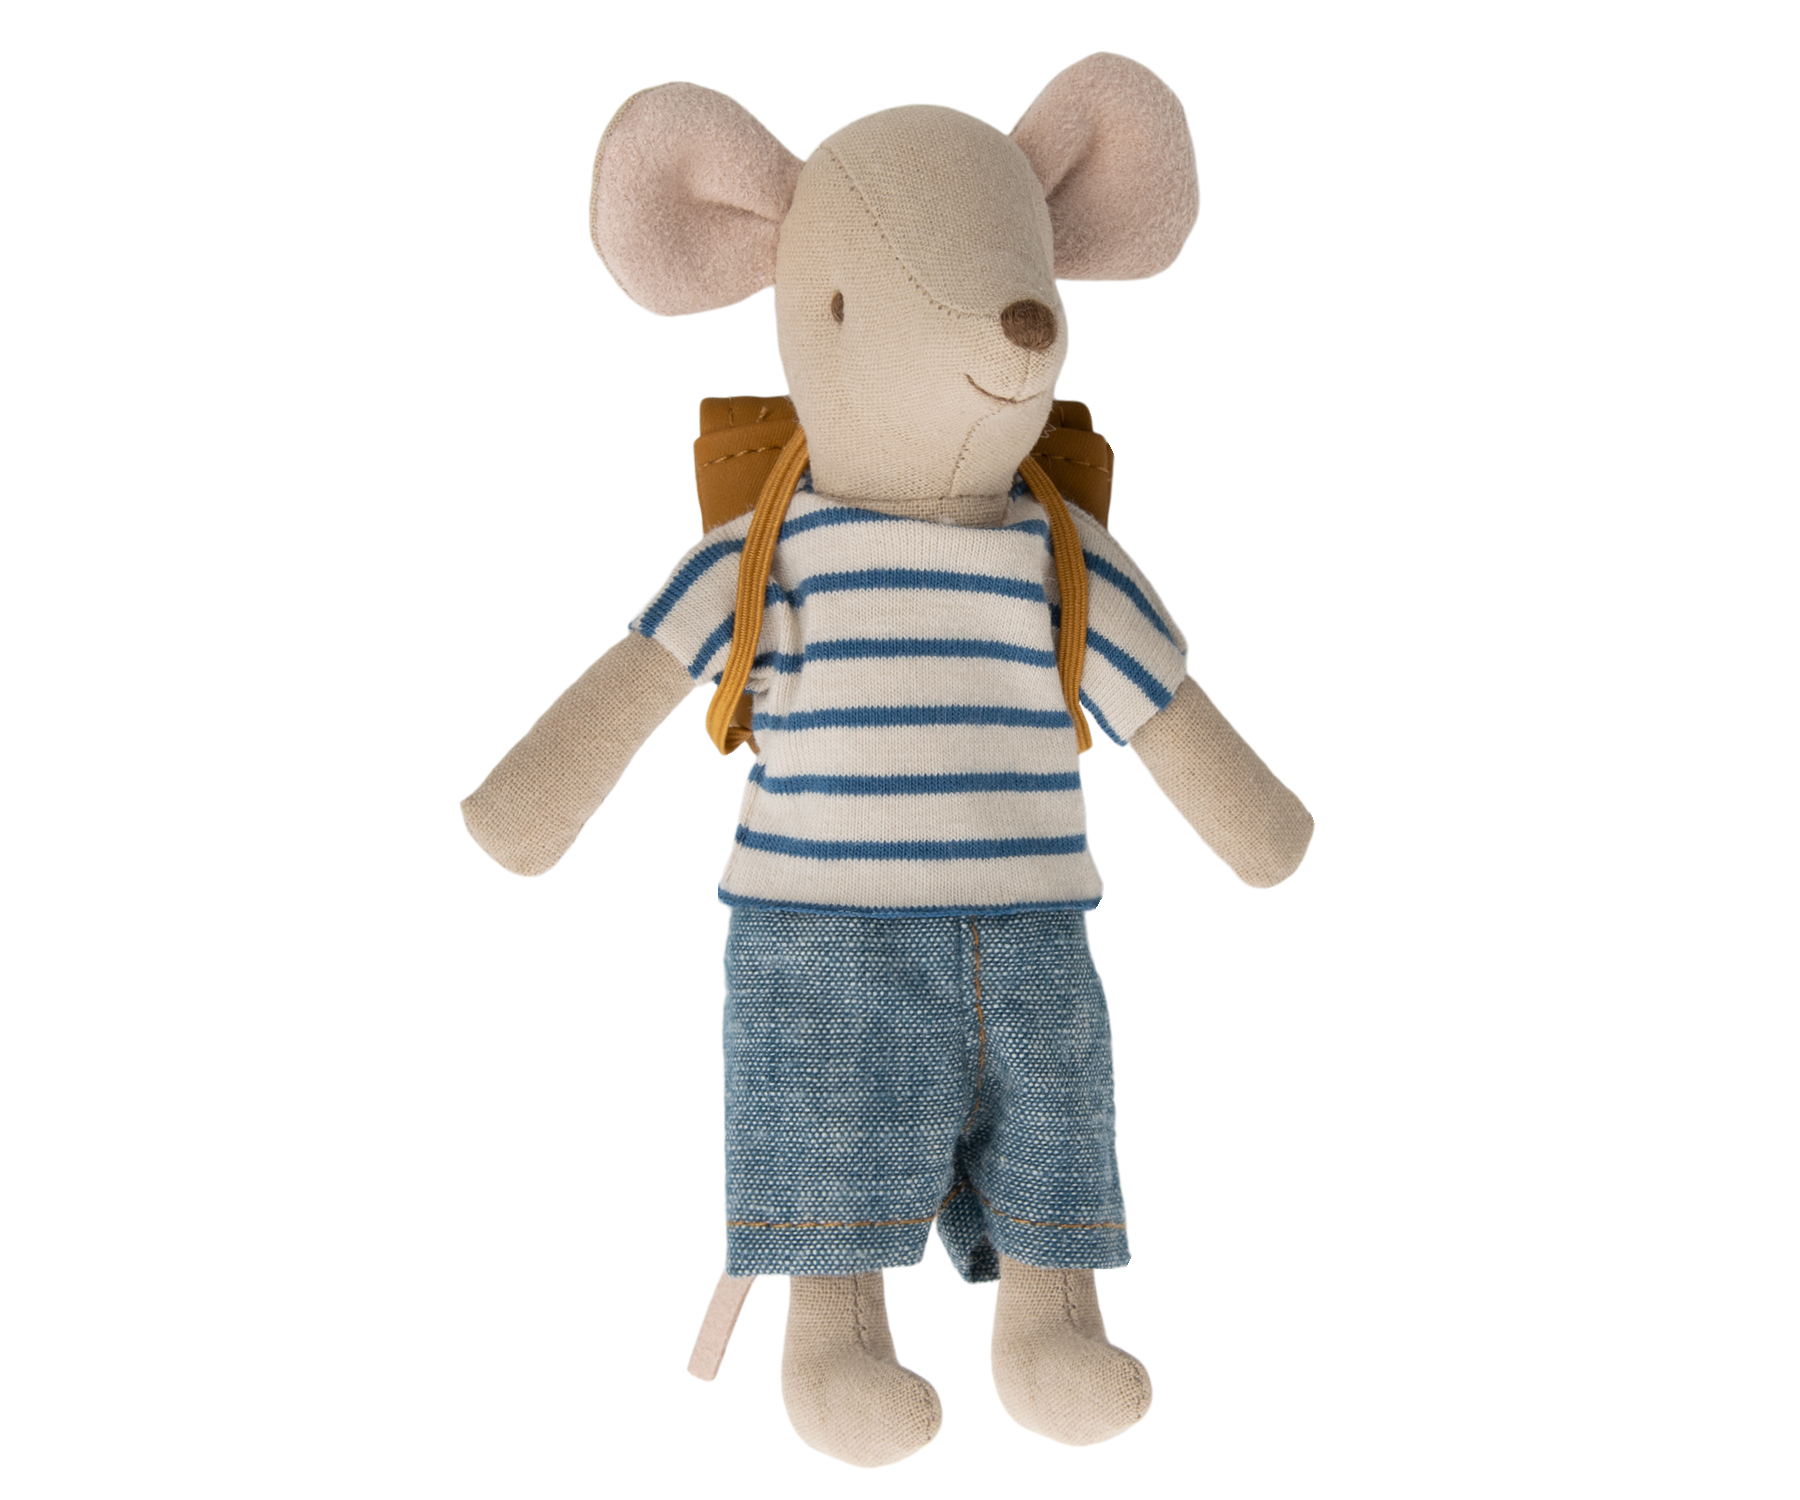 Tricycle mouse, Big sister with bag - Red